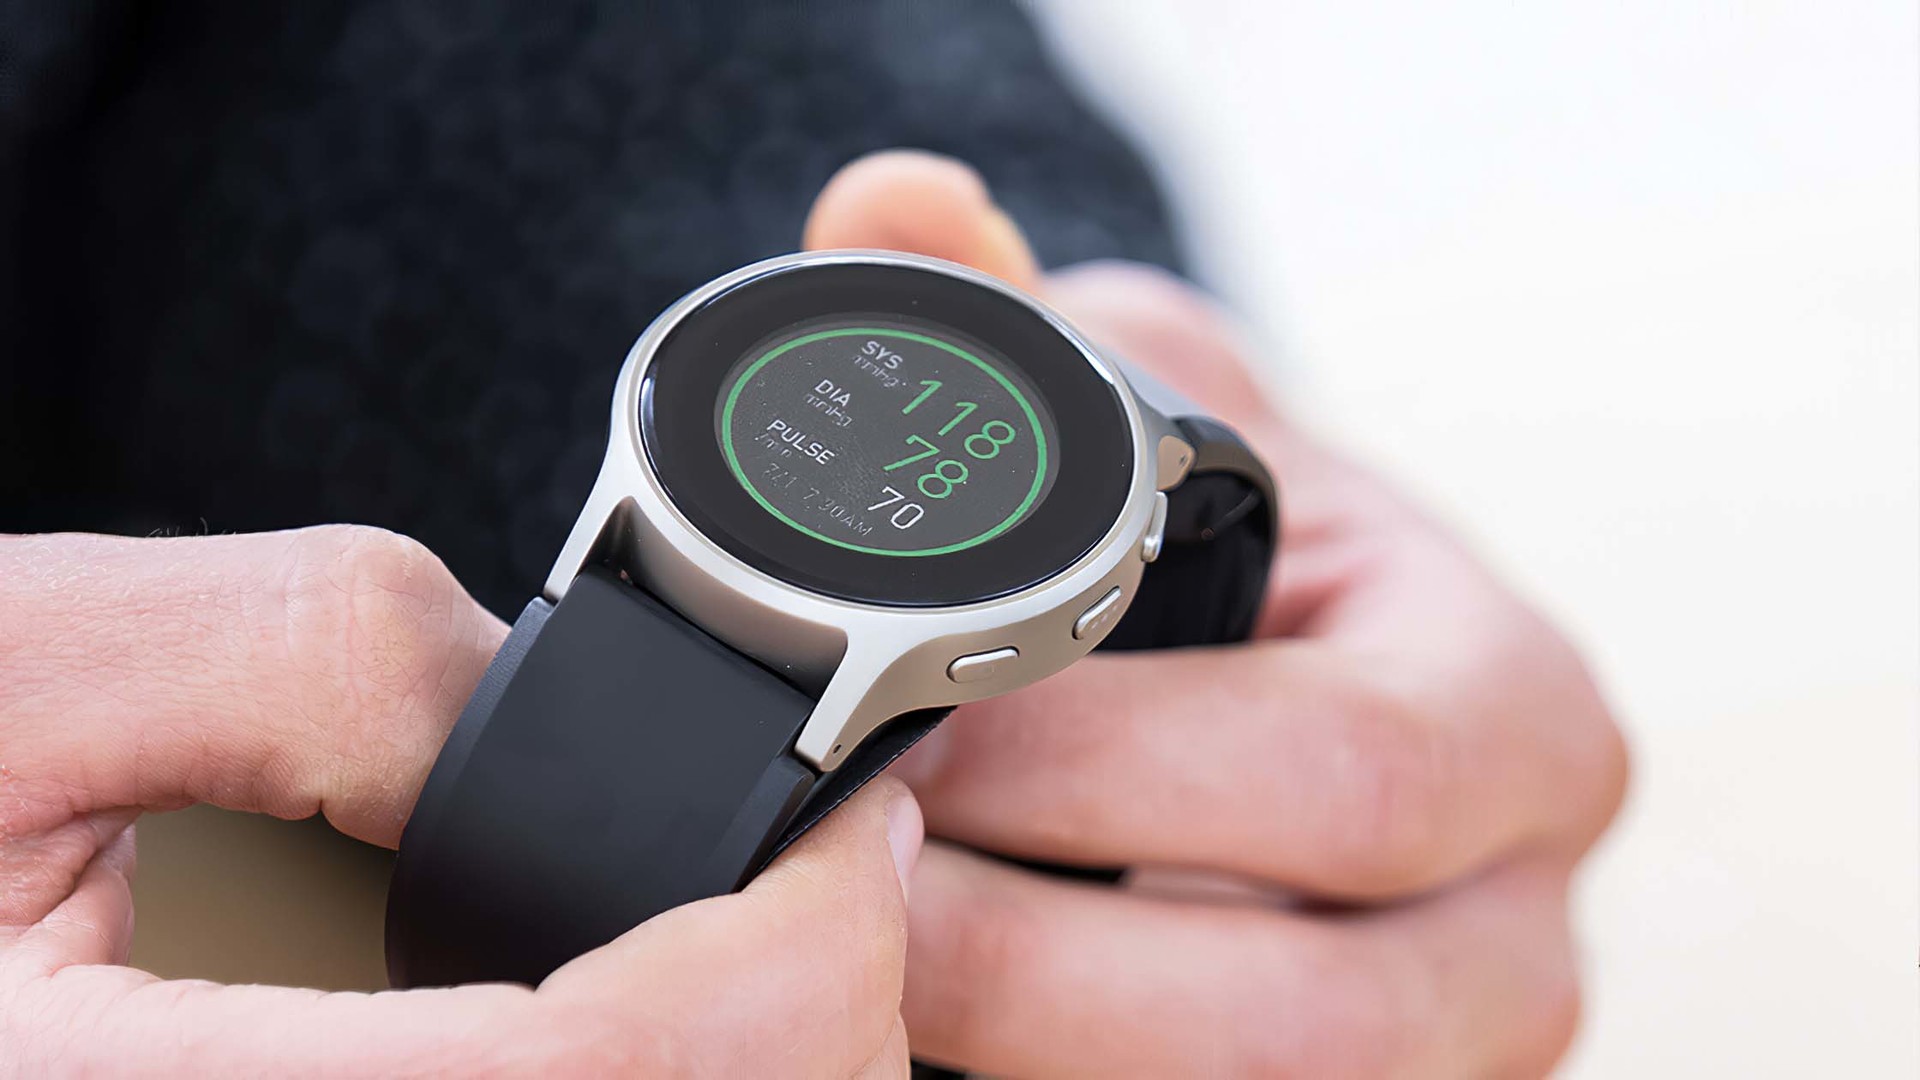 Omron launches HeartGuide watch-based wearable BP monitor - MassDevice